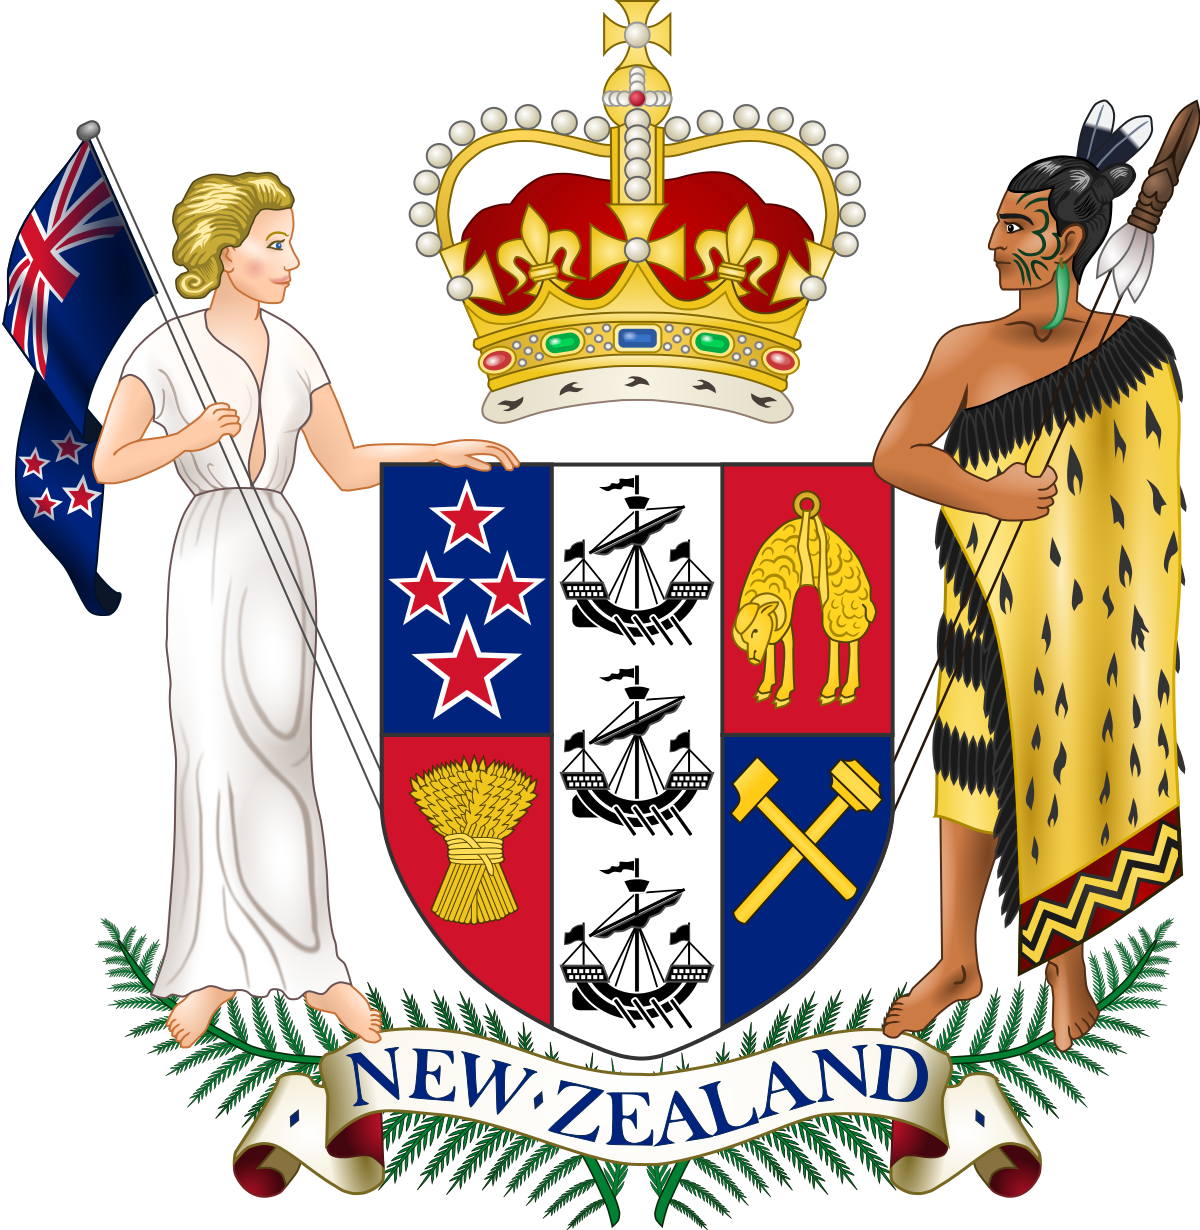 Rime Clipart Government Official - High Commission Of New Zealand, London (1200x1230)